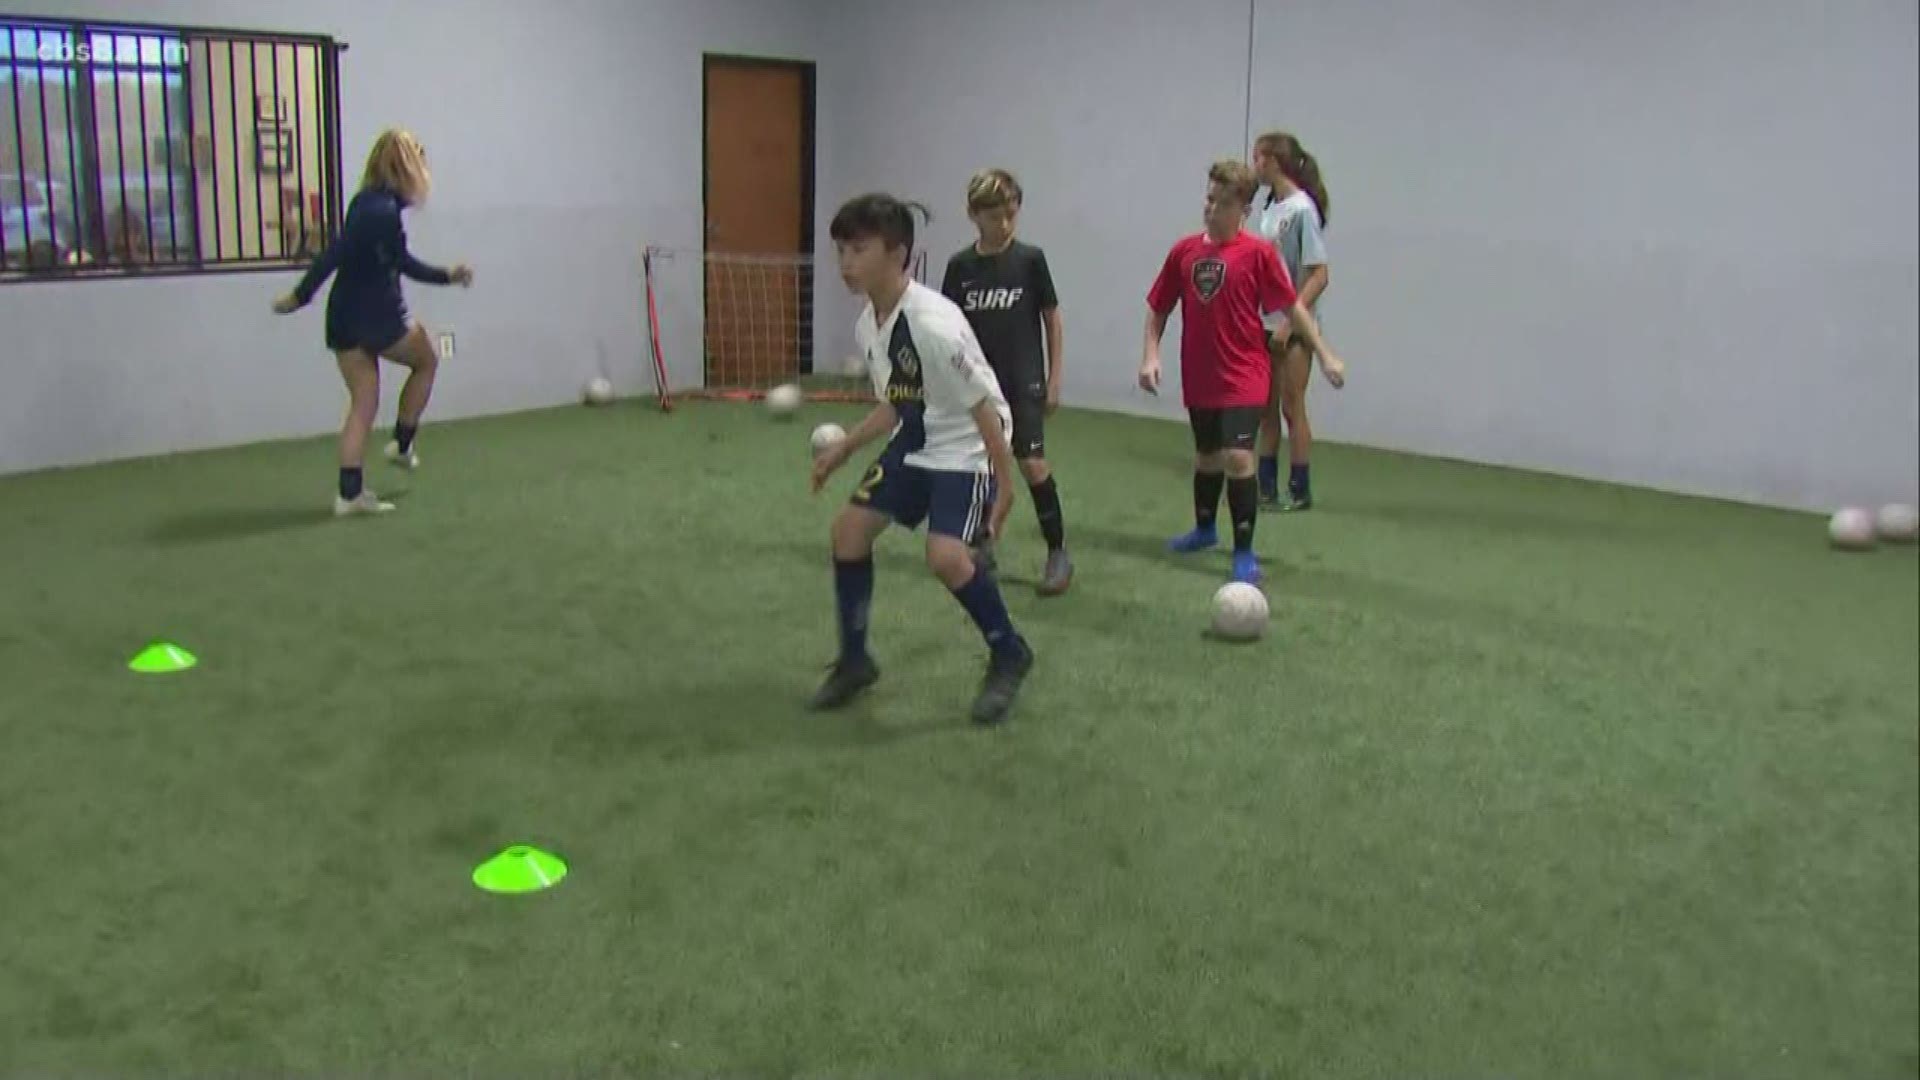 Momentum Training Center uses the newest equipment and training techniques to teach kids to play the game of soccer.